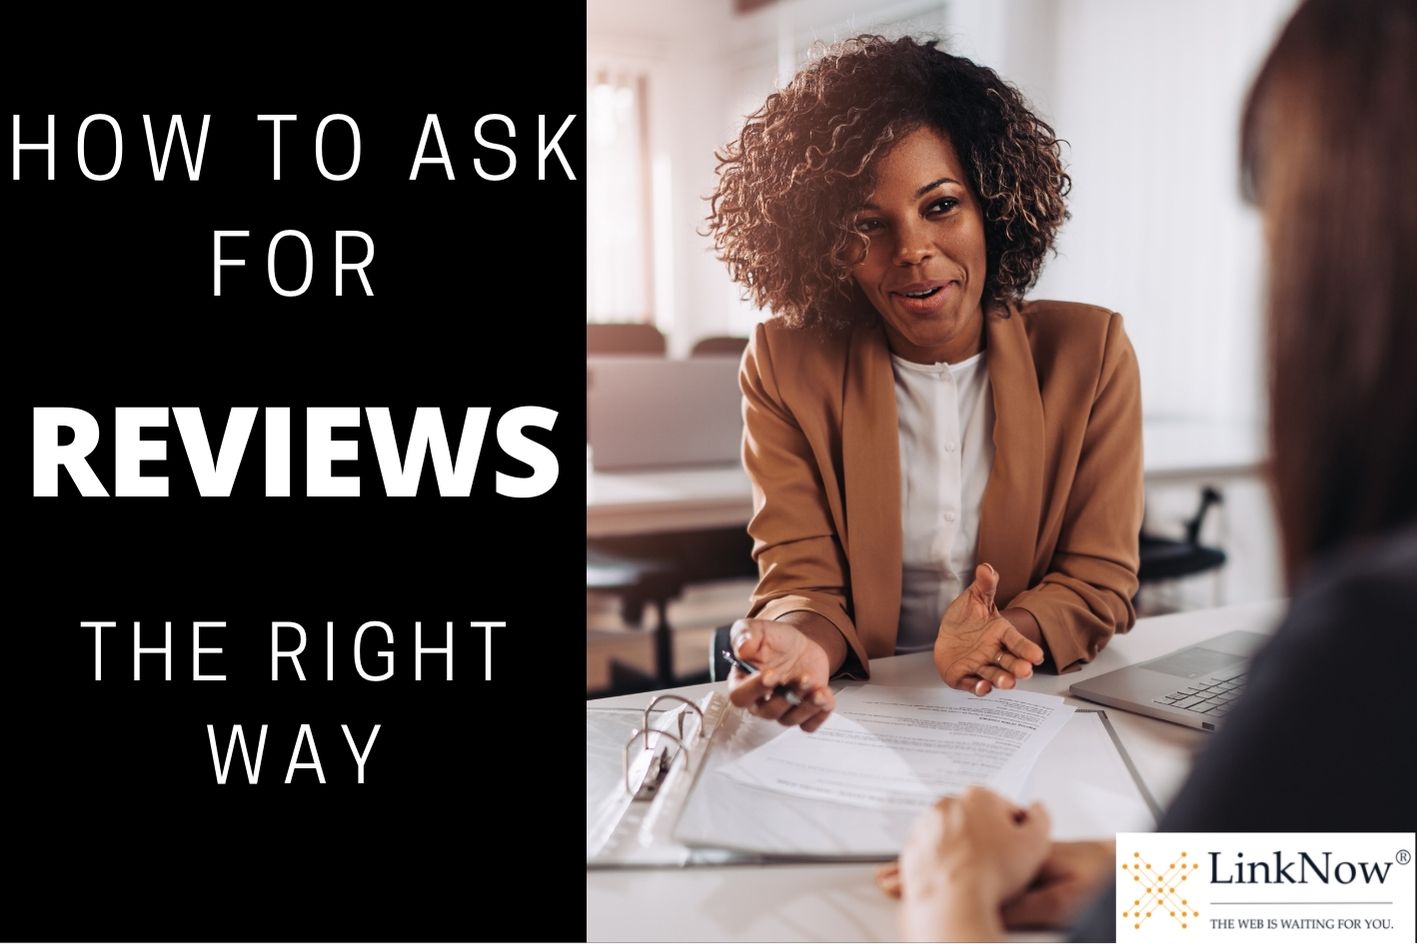 A business woman talks to a client, both sitting at a desk. Caption says: How to ask for reviews the right way.